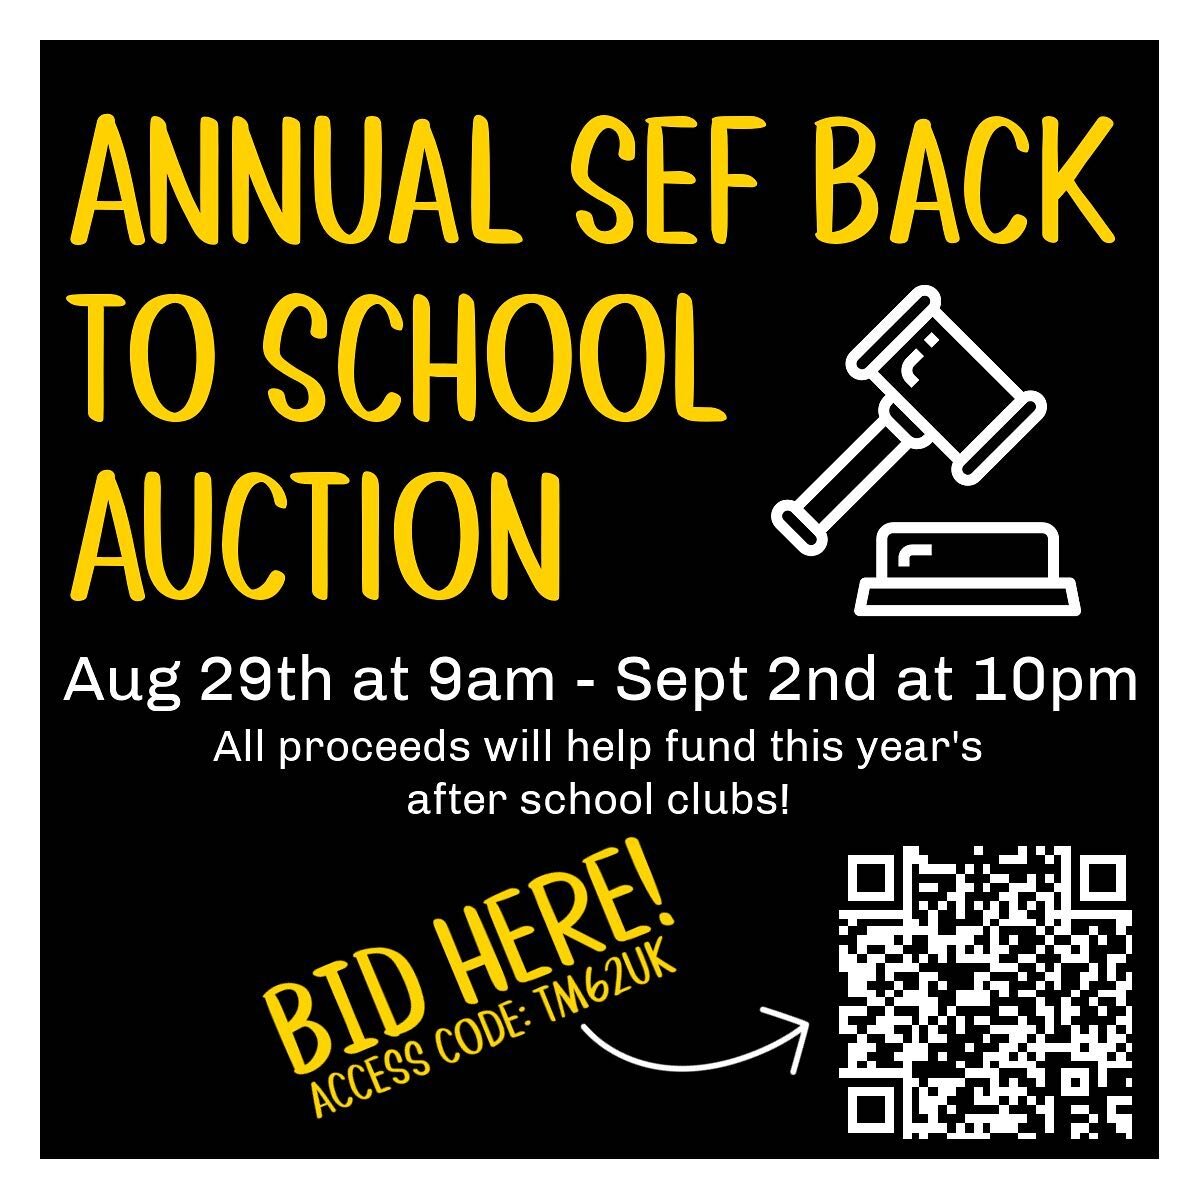 BACK TO SCHOOL AUCTION

It's that time of year again! We have the most amazing auction items this year including:
-Principal for the Day
-NCAA Final Four Lunch
-Camping at Swallow School 
-Reserved Parking Spots 
and so much more!

Bidding will run M